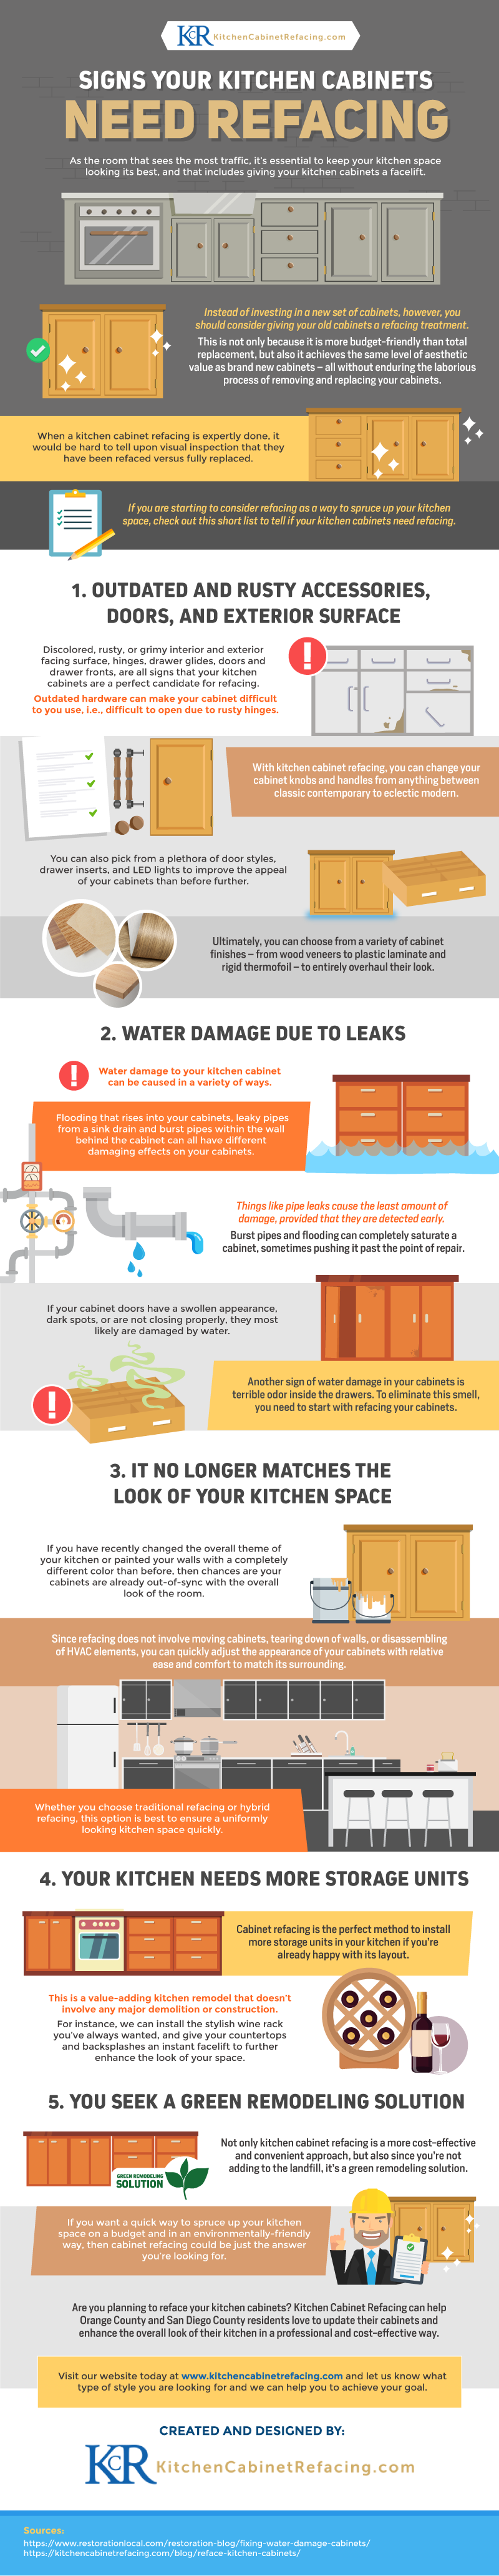 Signs Your Kitchen Cabinets Need Refacing-01